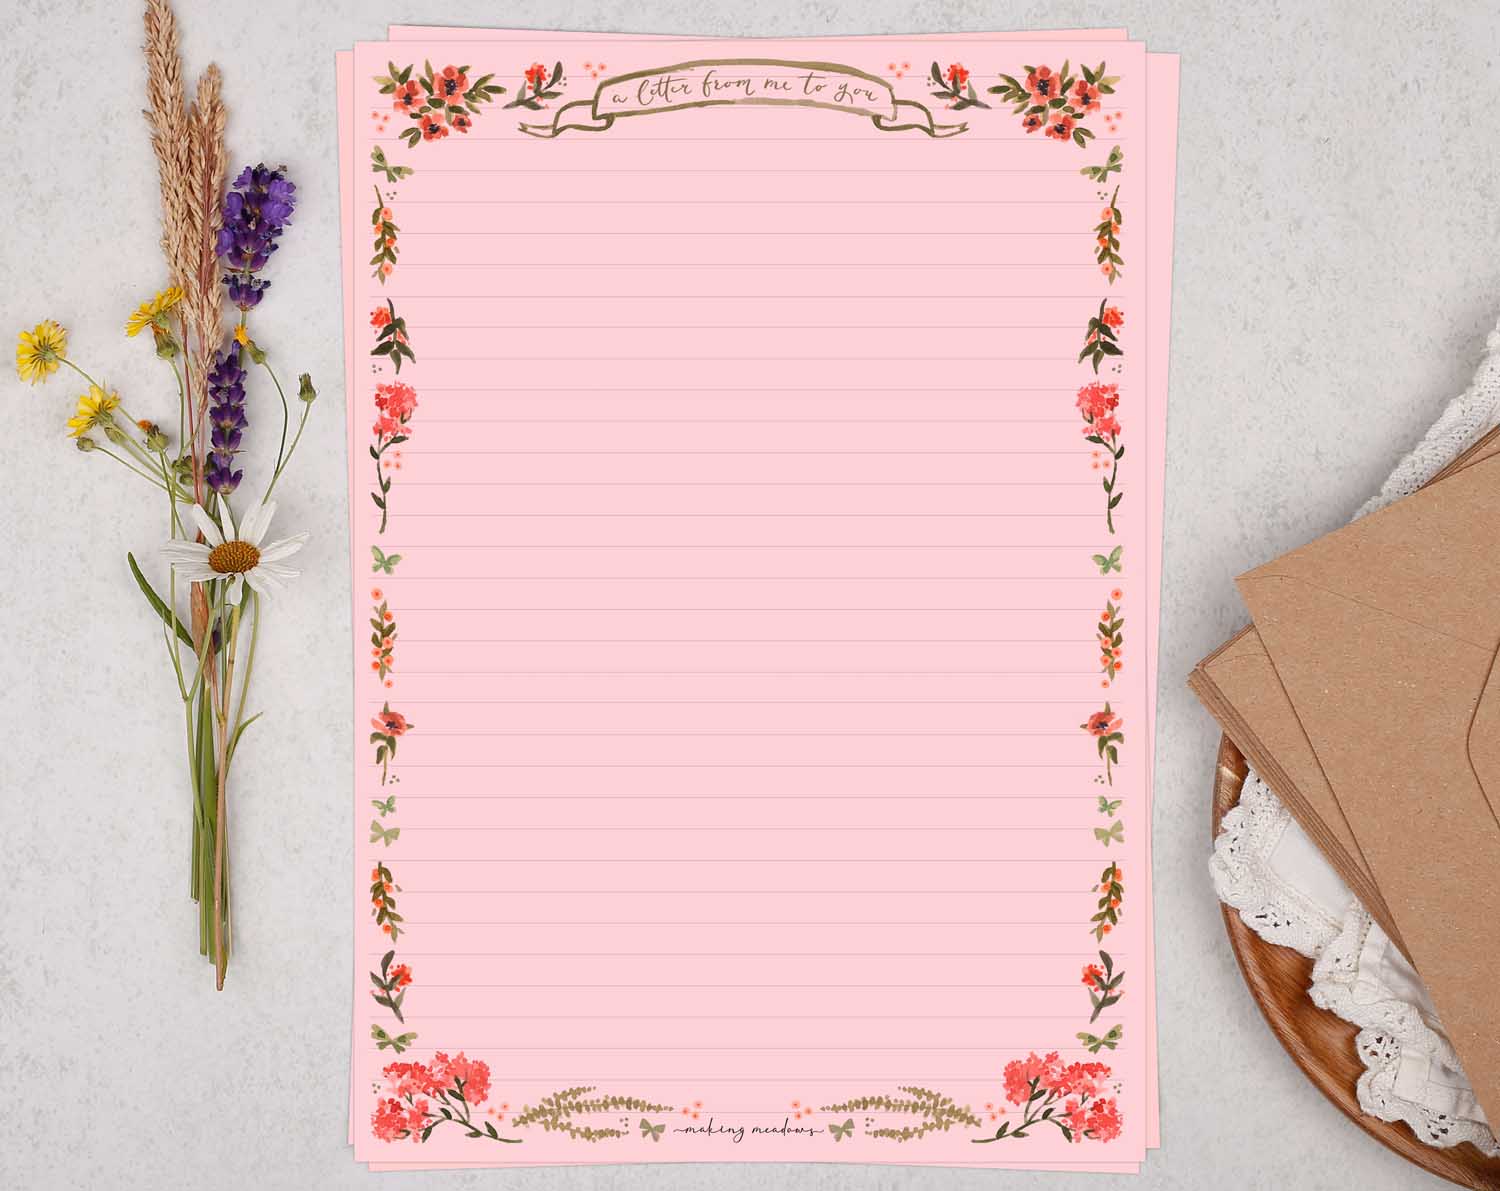 Pink A4 letter writing paper sheets with a Cute Town Village House watercolour border design.